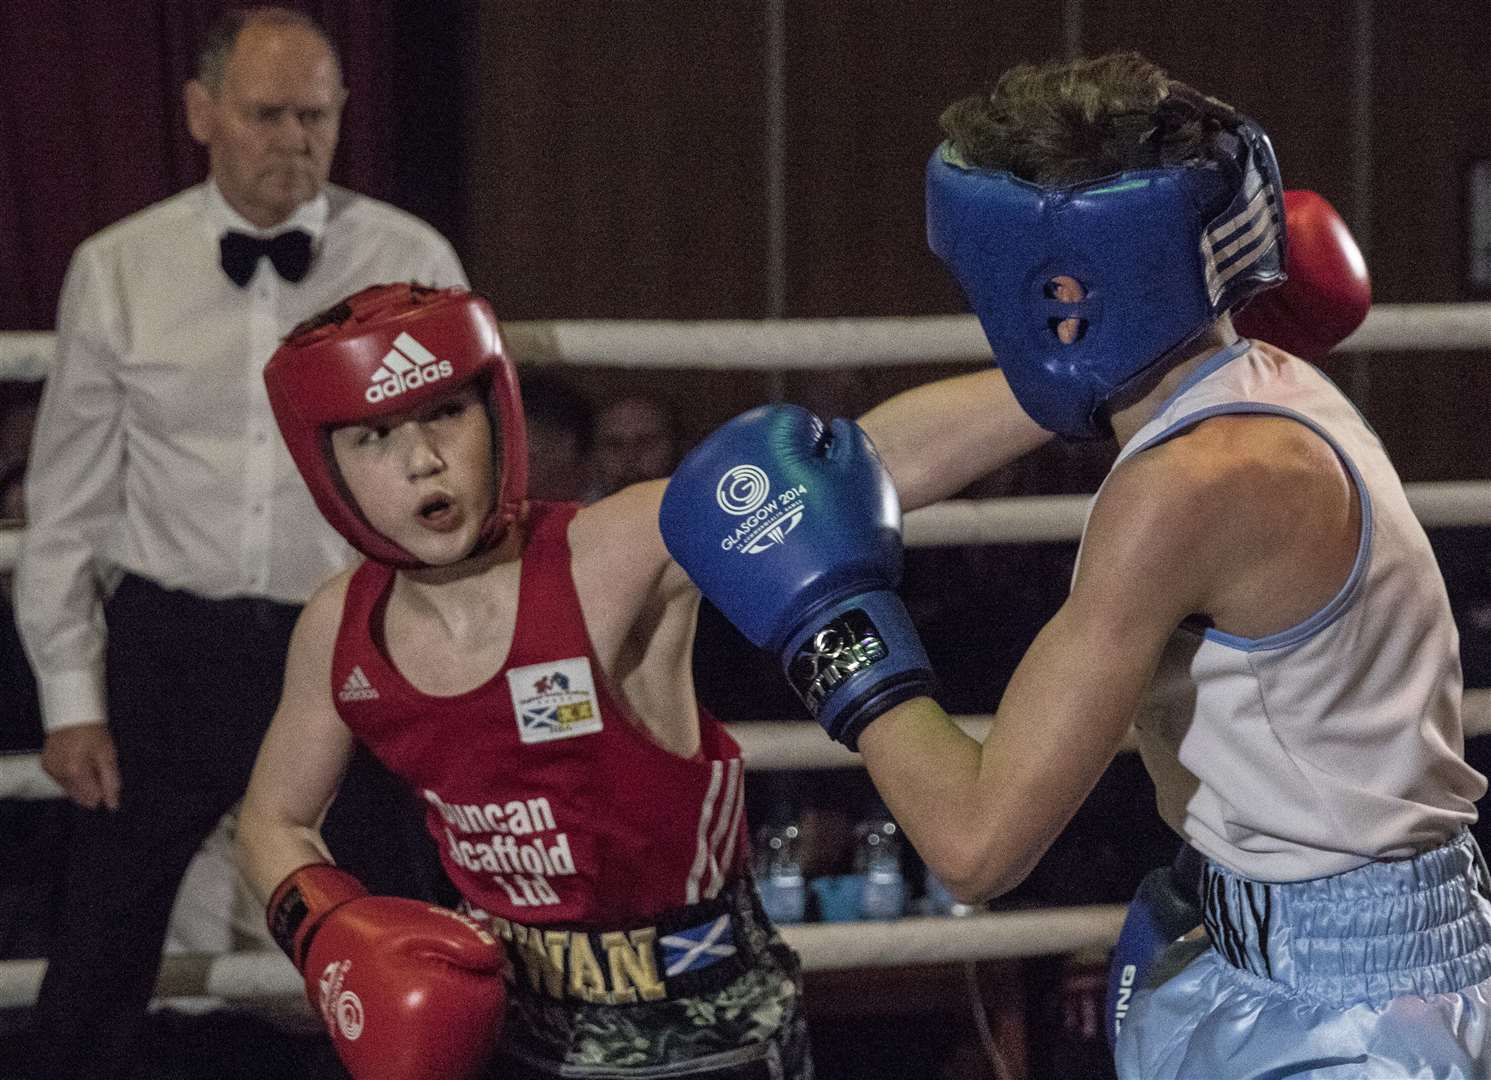 Ewan Gliniecki (red) defeated Cameron Sleith by unaninous decision at Highland Boxing Academy's home show in May 2019. Pictures: David Rothnie